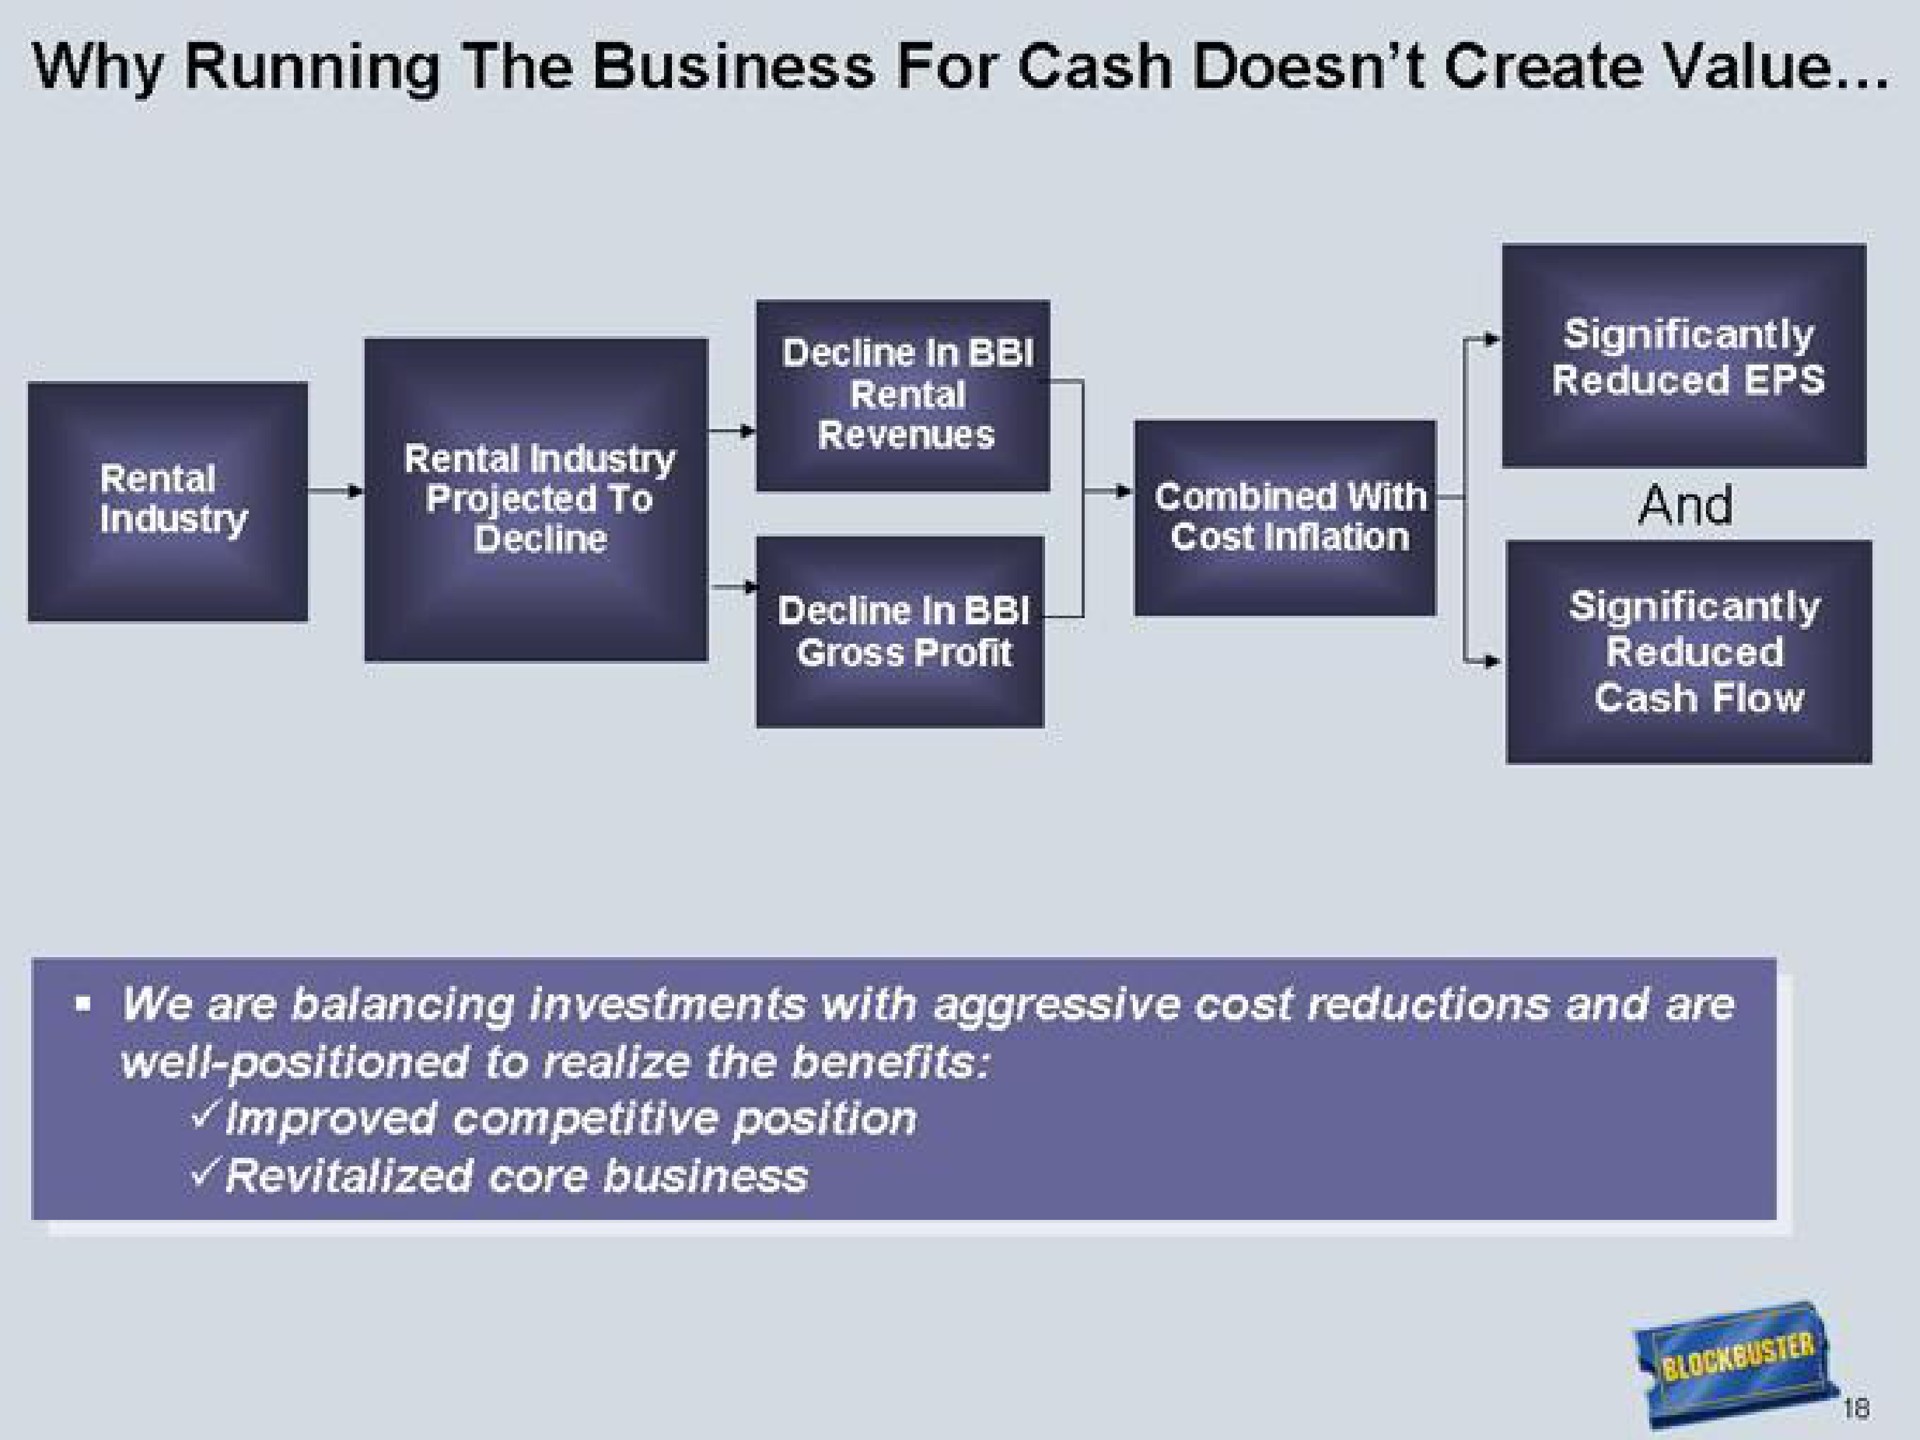 why running the business for cash create value | Blockbuster Video